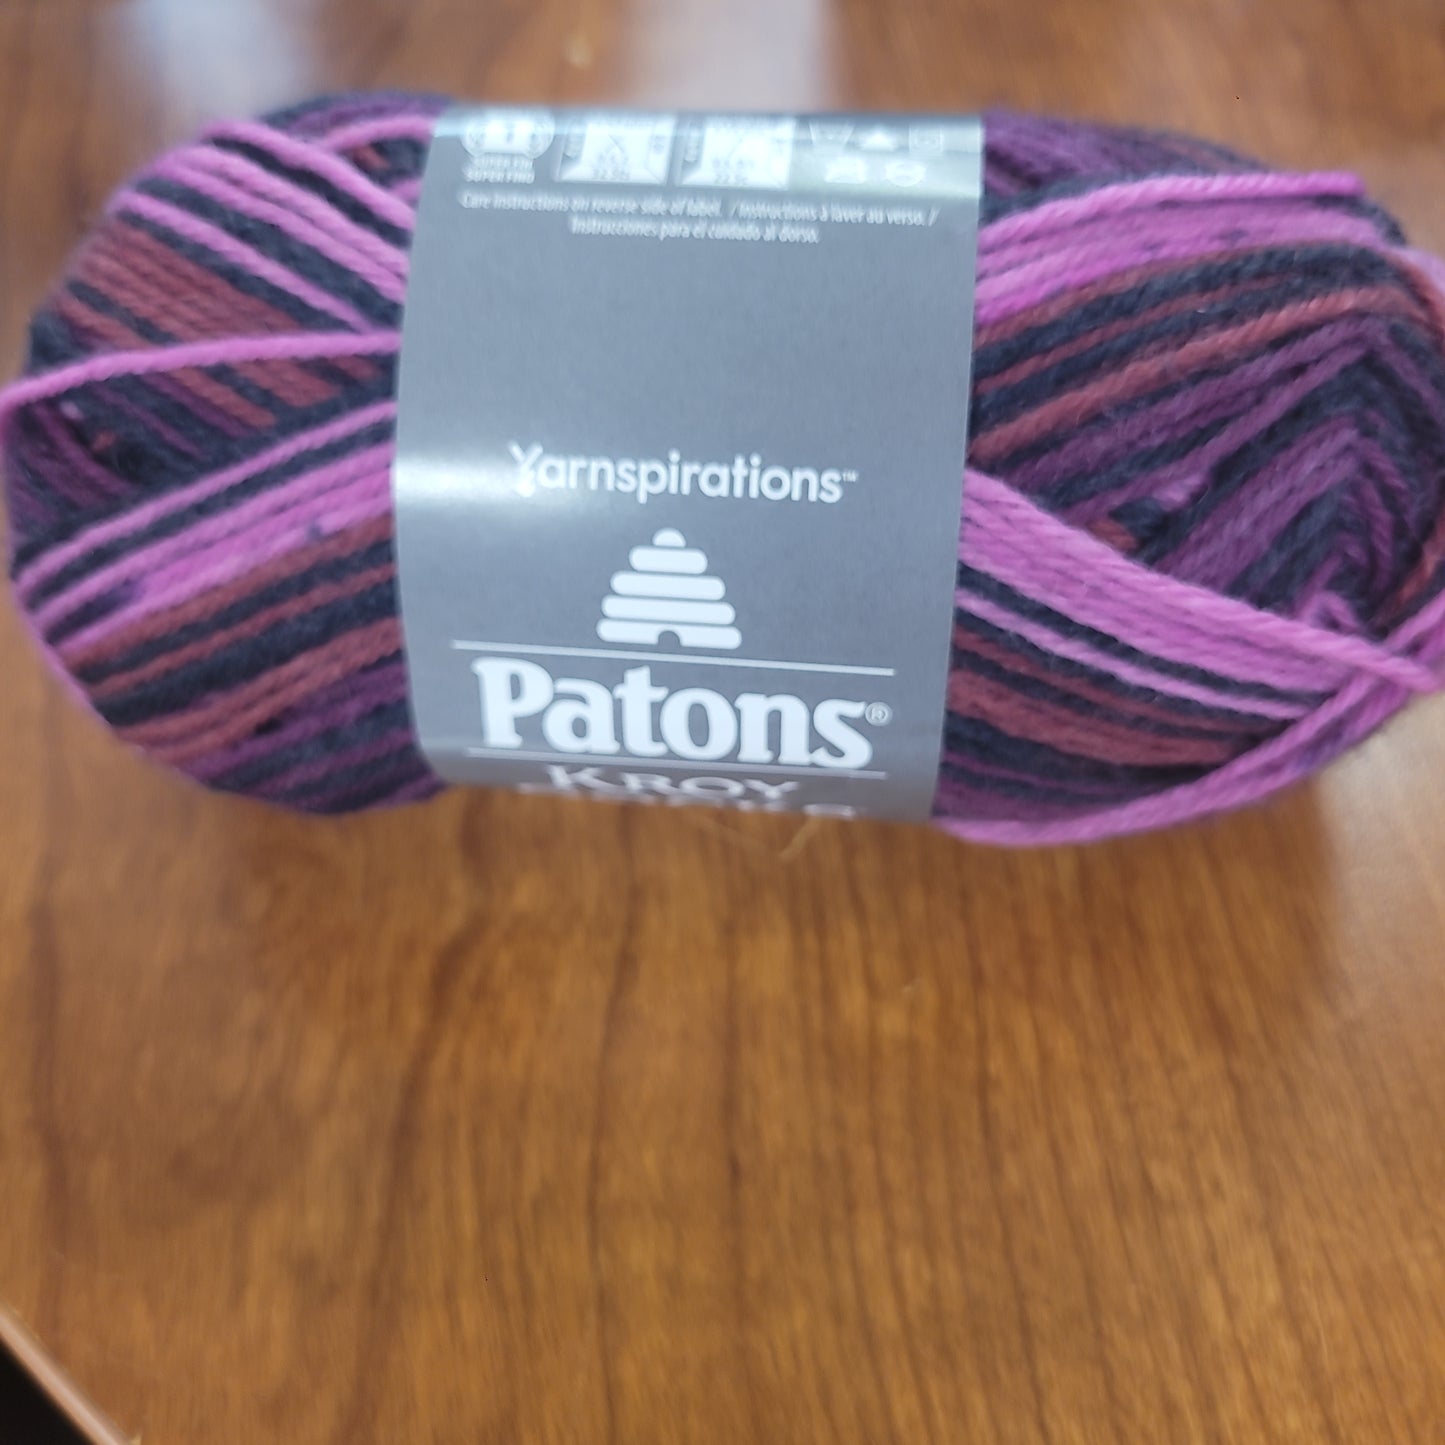 PATONS Kroy Socks - Laine Couture